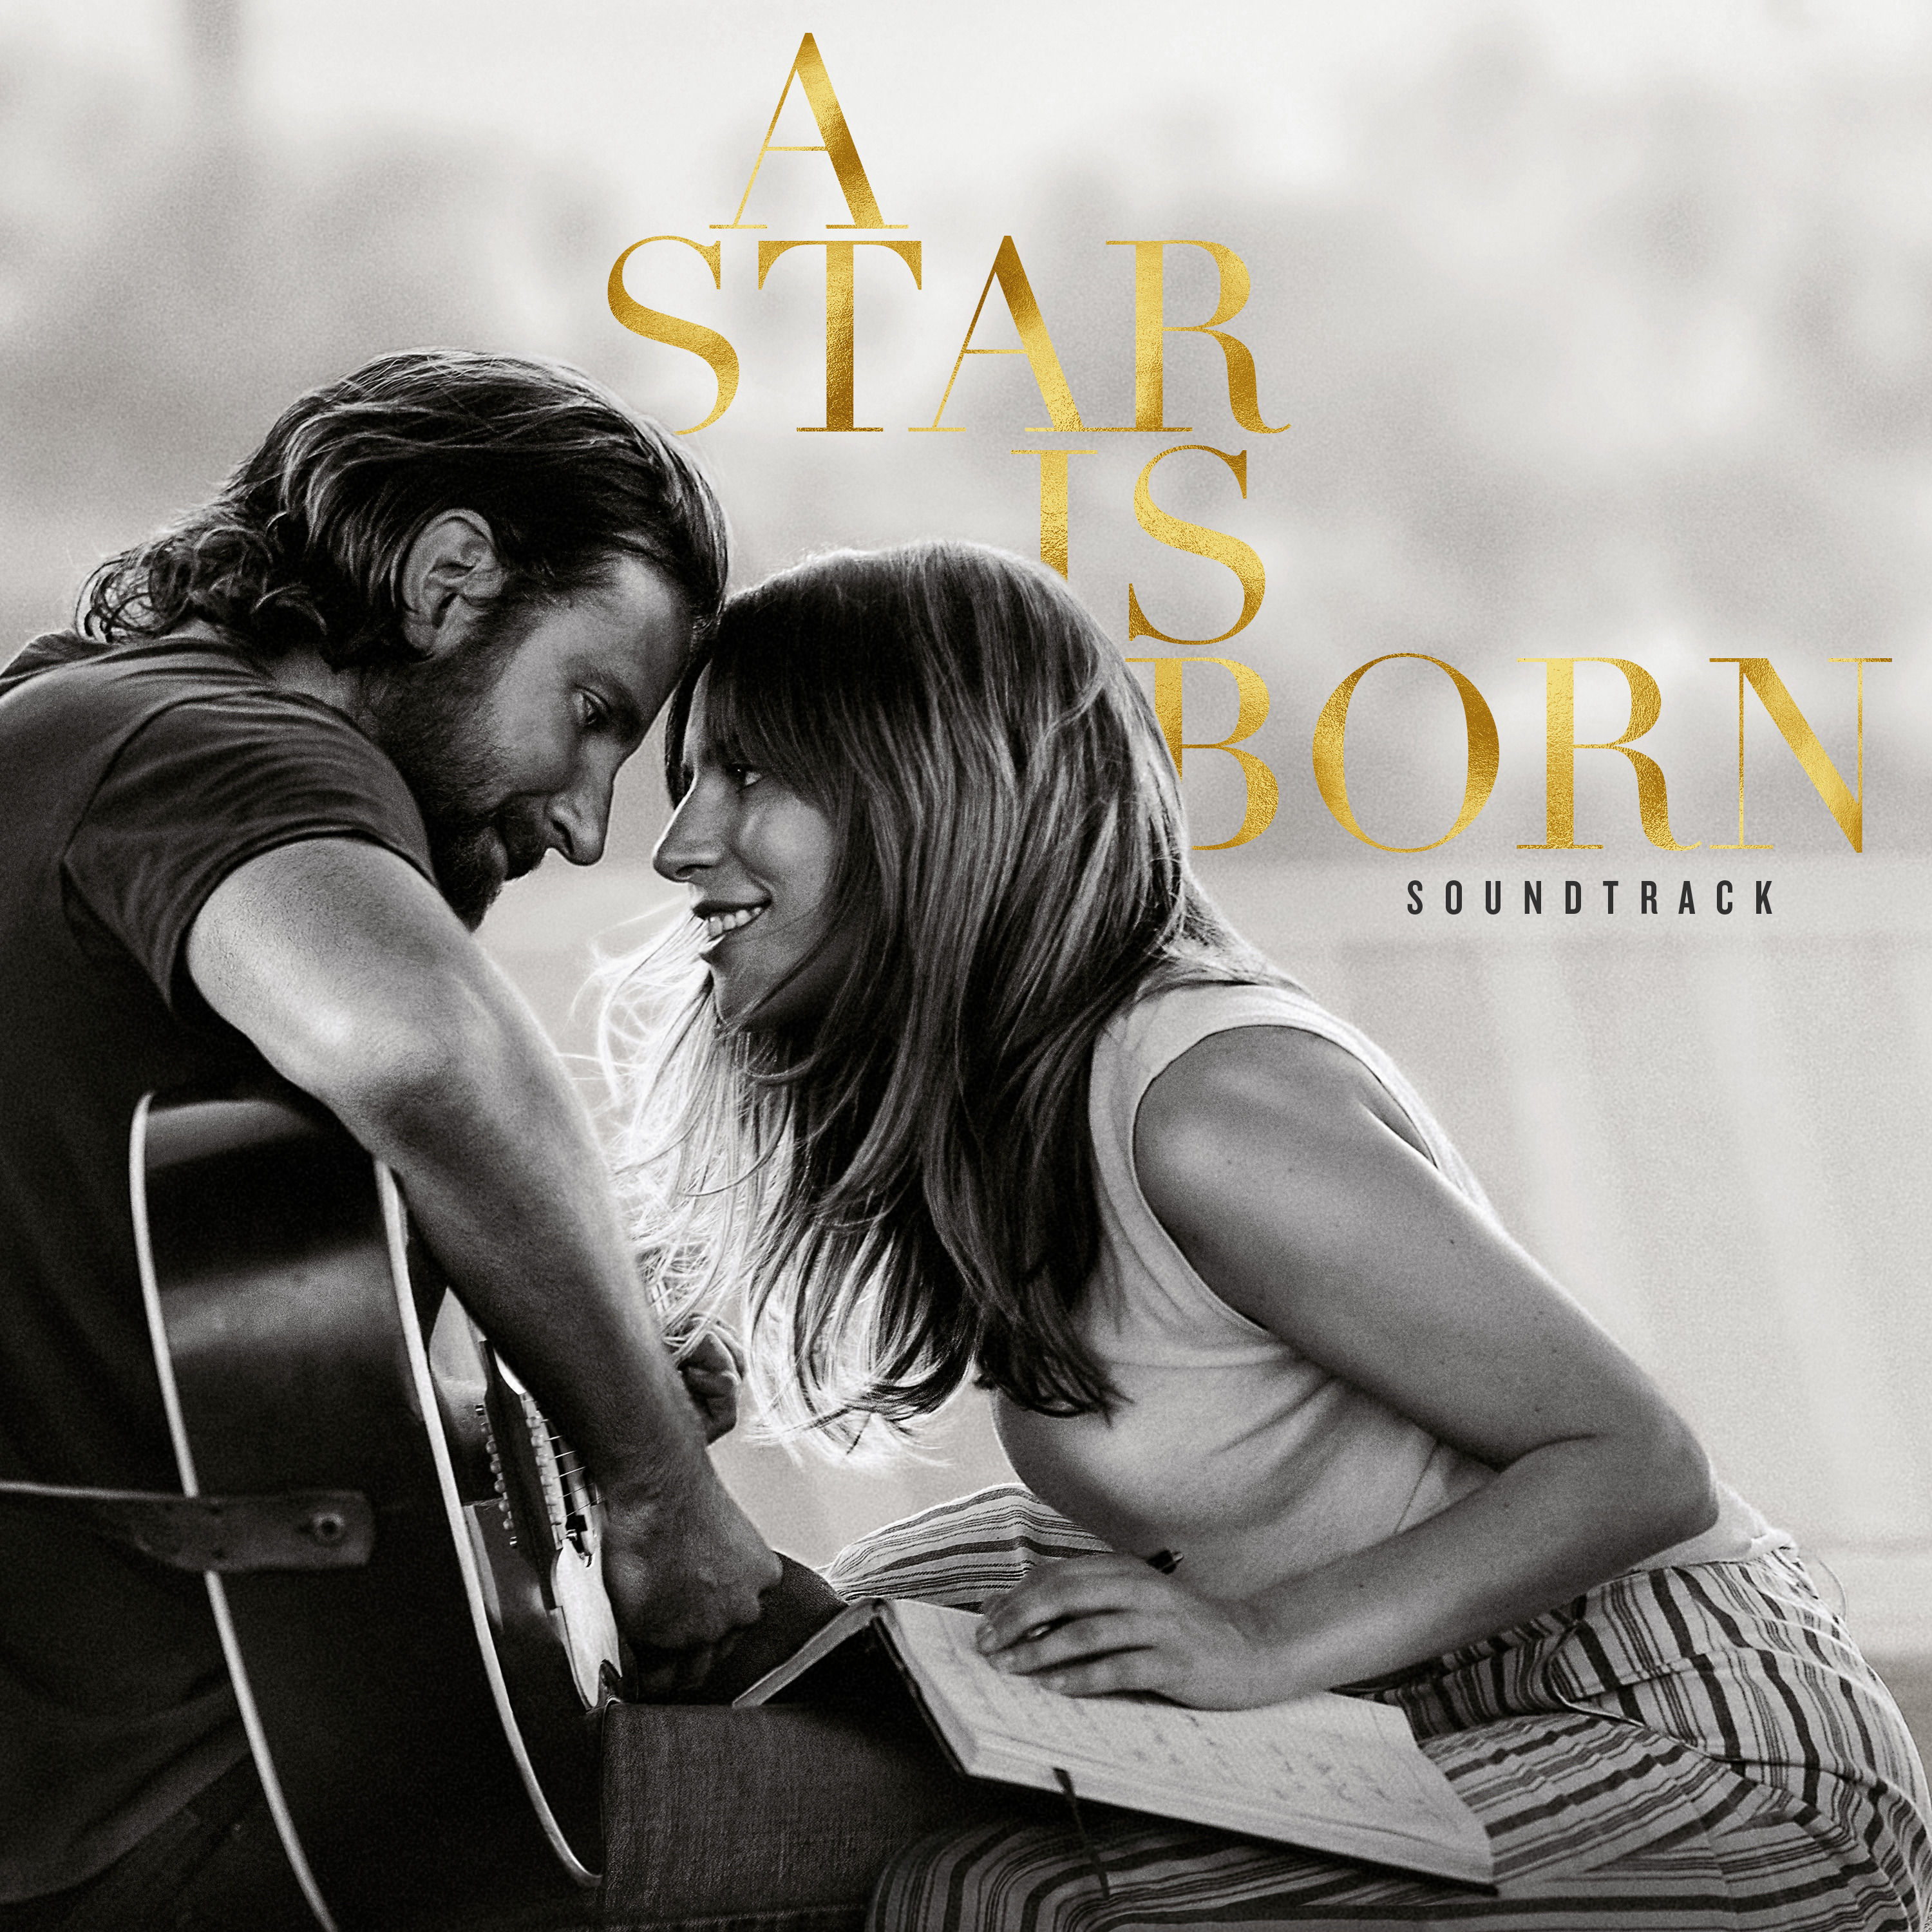 a star is born soundtrack cover art 2018